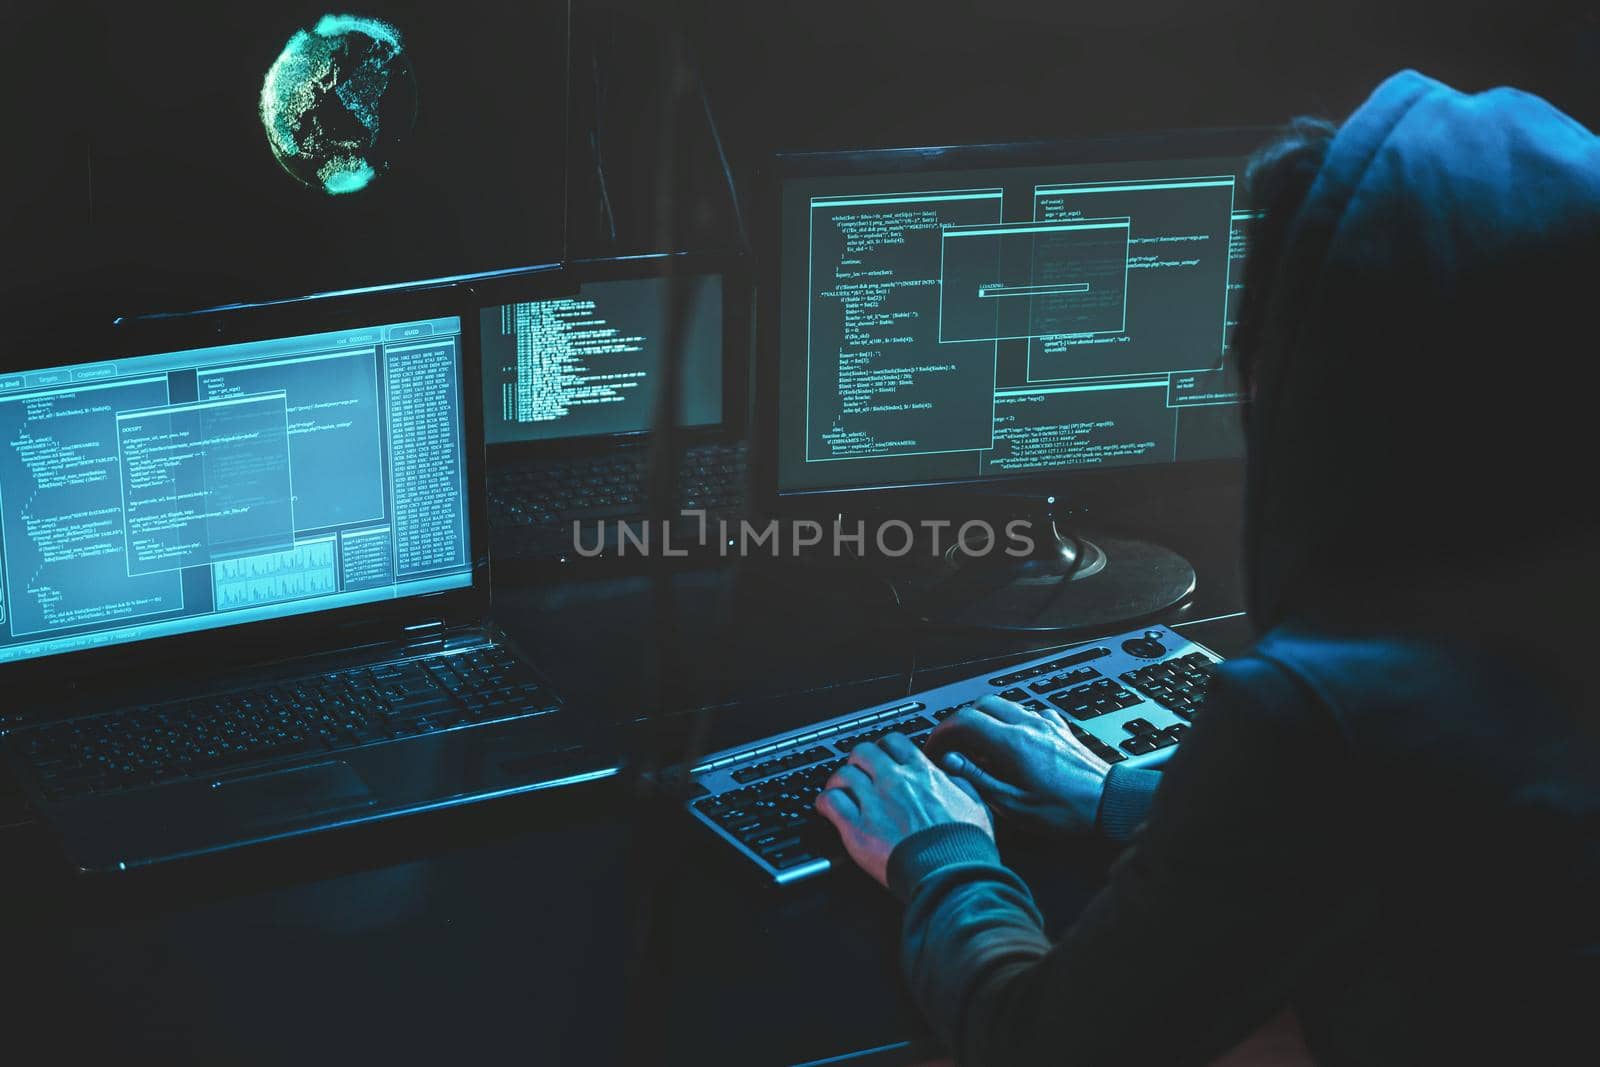 Cyber criminal hacking system at monitors, hacker attack web servers in dark room at computer with monitors sending virus using email vulneraility. Internet crime, hacking and malware concept. Download image